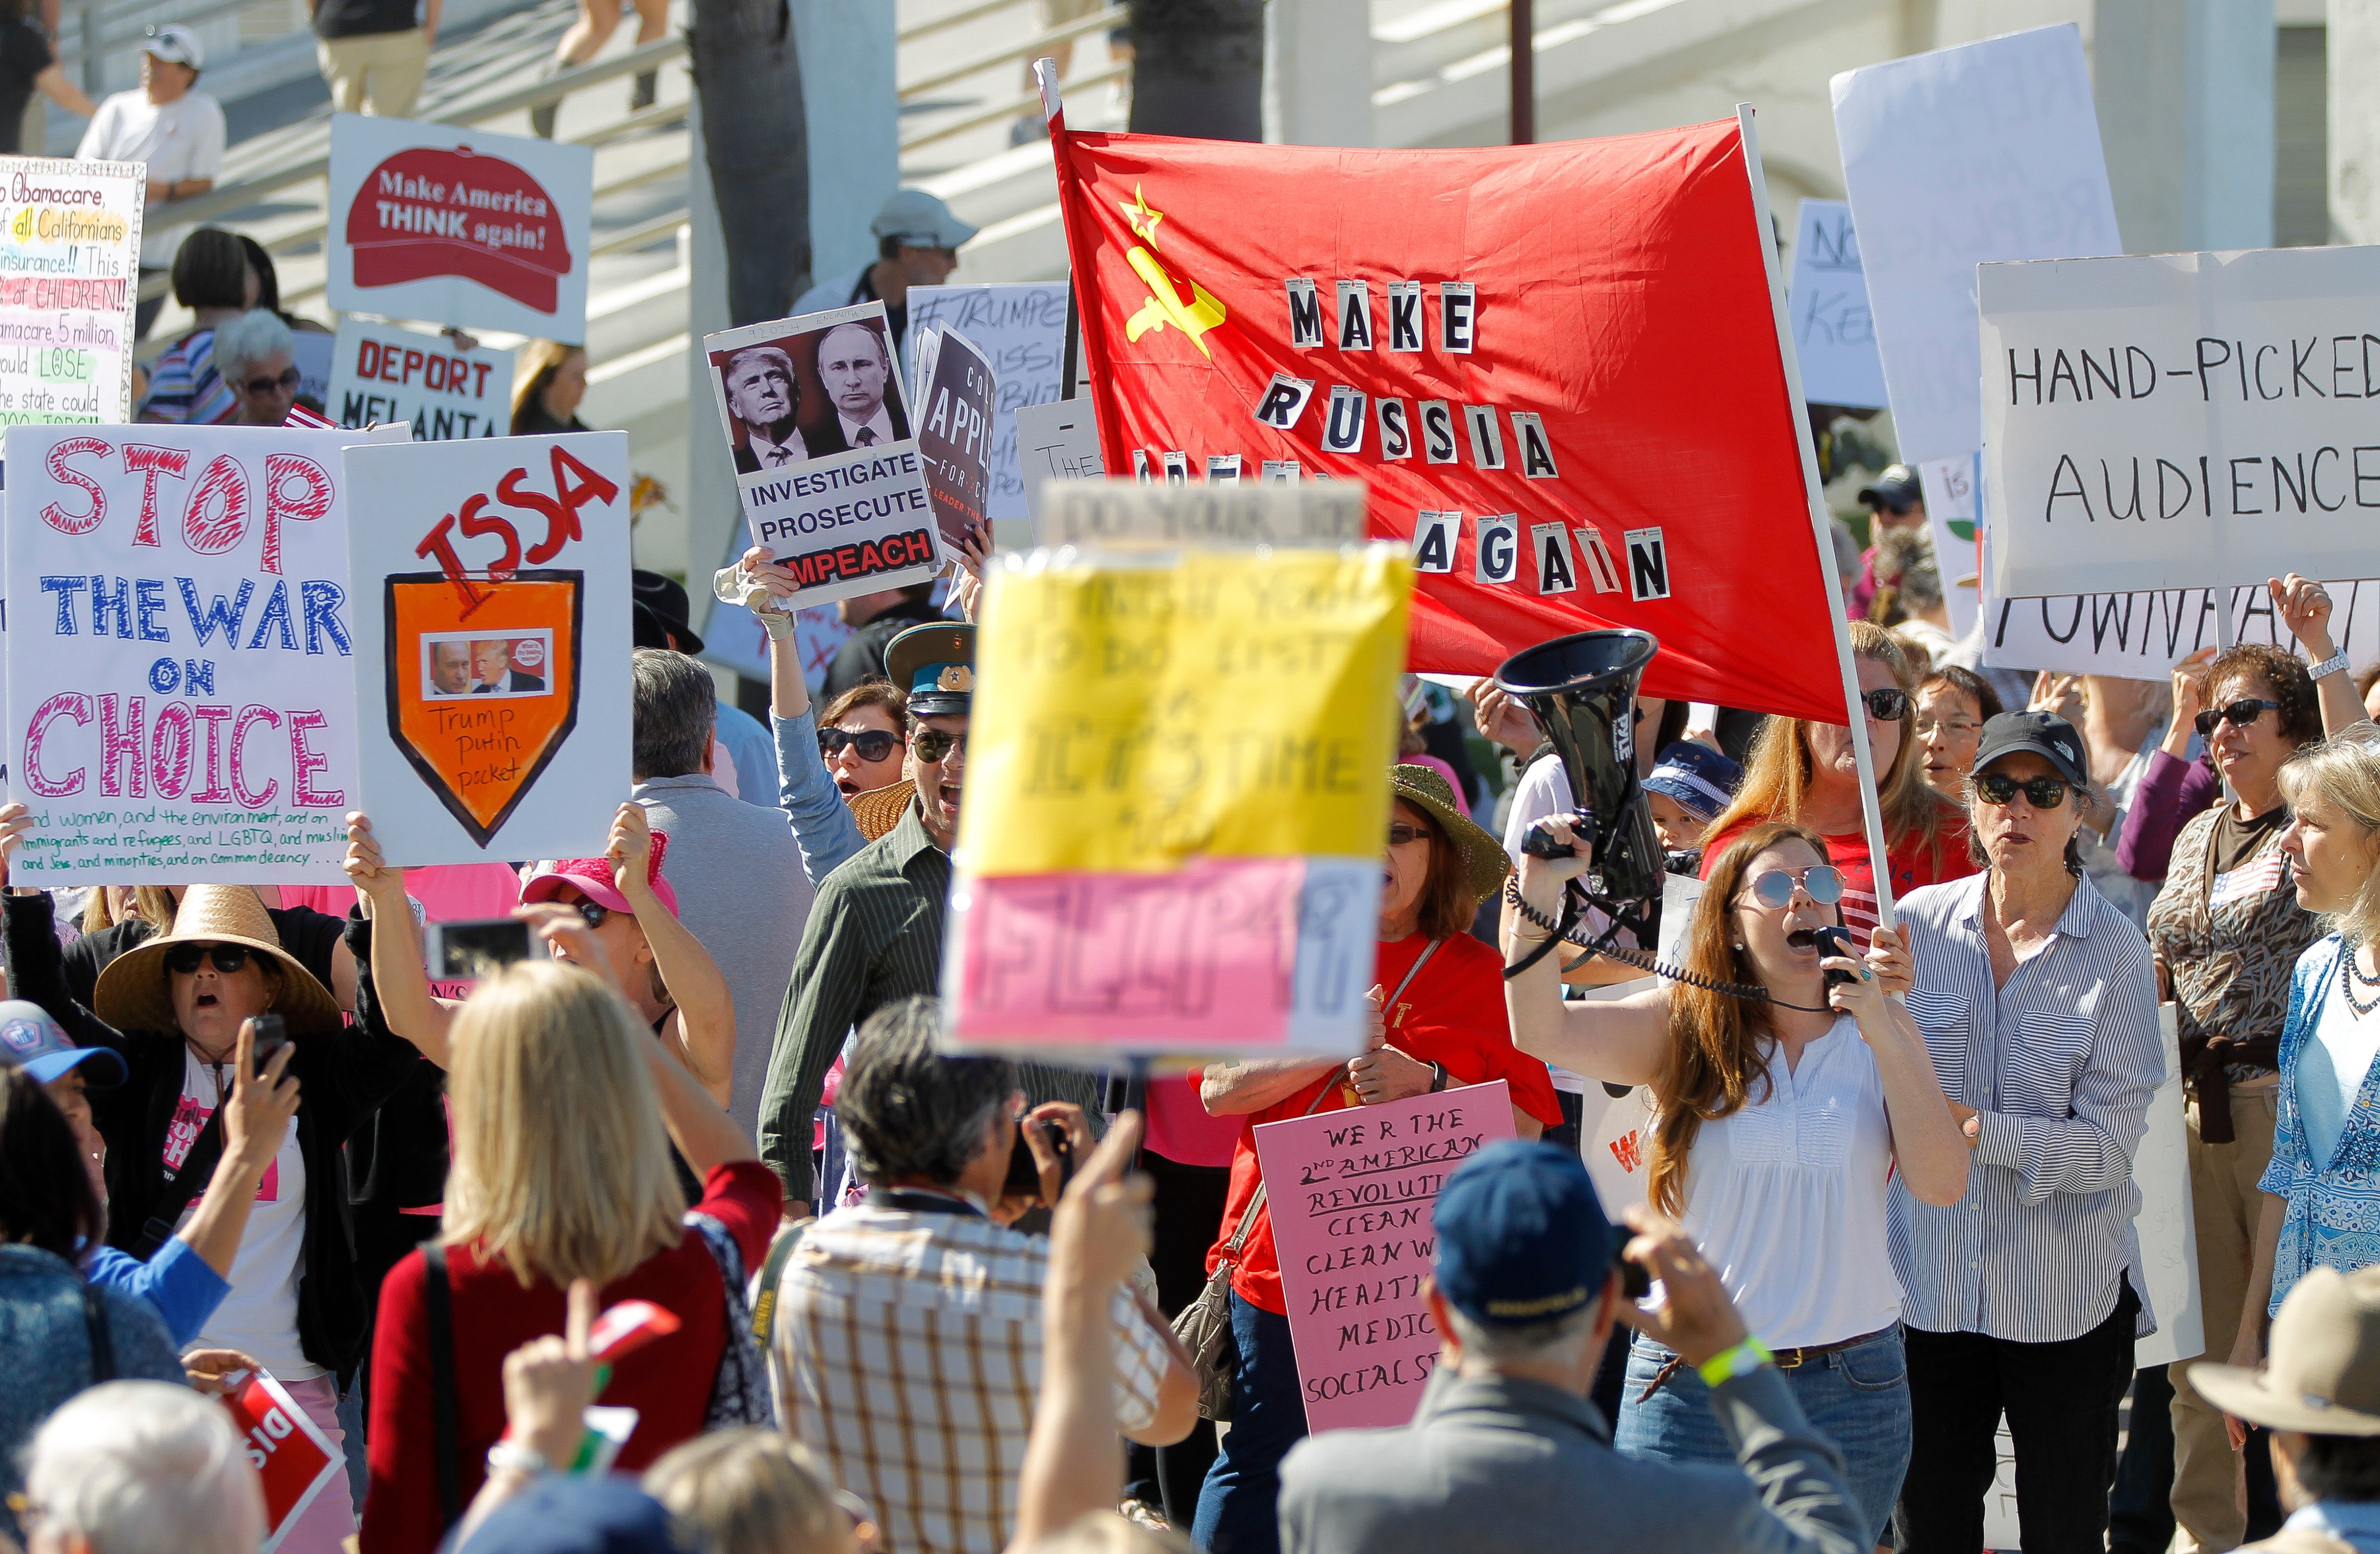 People protest outside of the Junior Seau Beach Community Center as U.S. Rep. Darrell Issa holds a town hall meeting inside on Saturday, March 11, 2017 in Oceanside, Calif.   Issa held the meetings to discuss health care reform with constituents from his district, which straddles Orange County and San Diego County. (Hayne Palmour IV—AP)